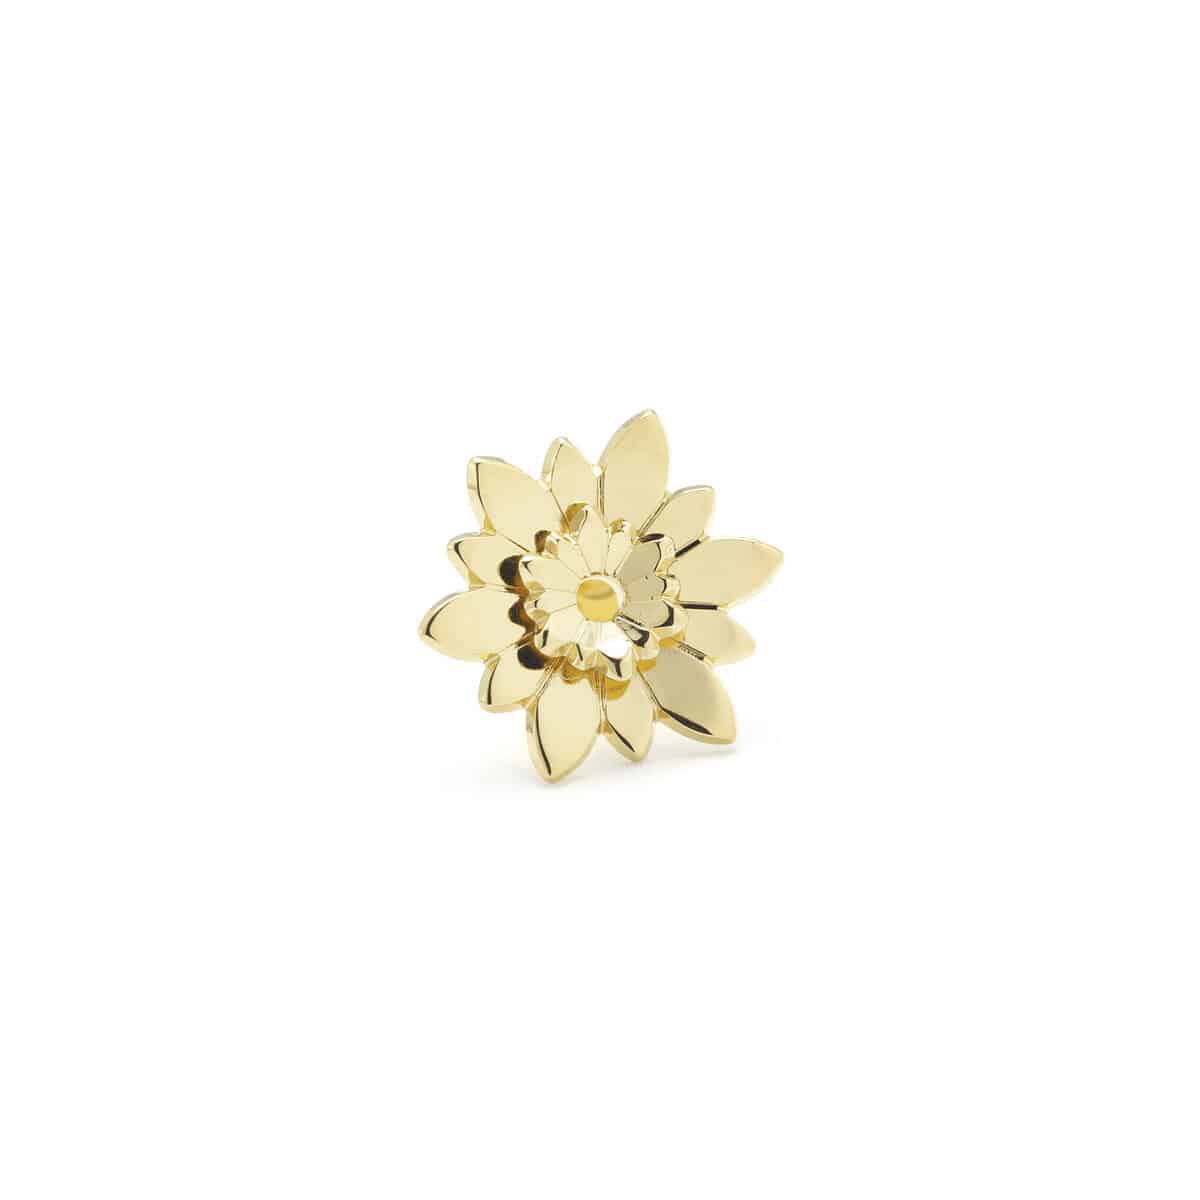 DAHLIA Medium buckle, gold-plated, sold in pairs and individually